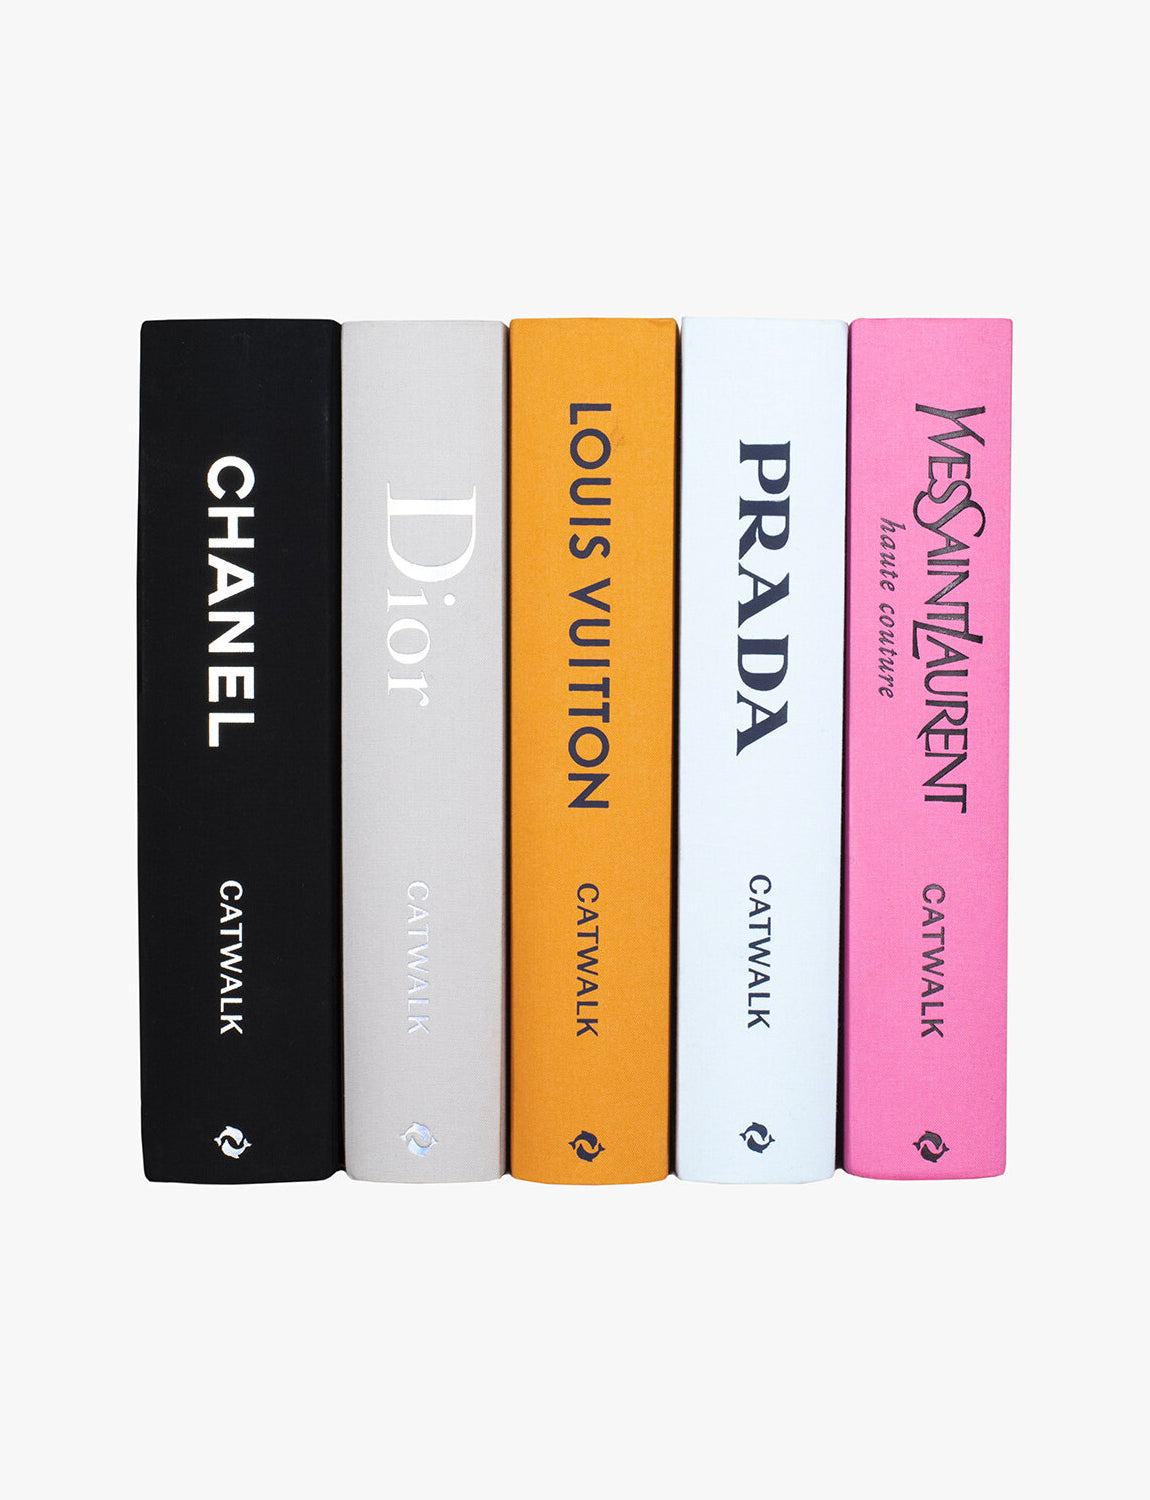 Chanel: The Complete Collections [Book]